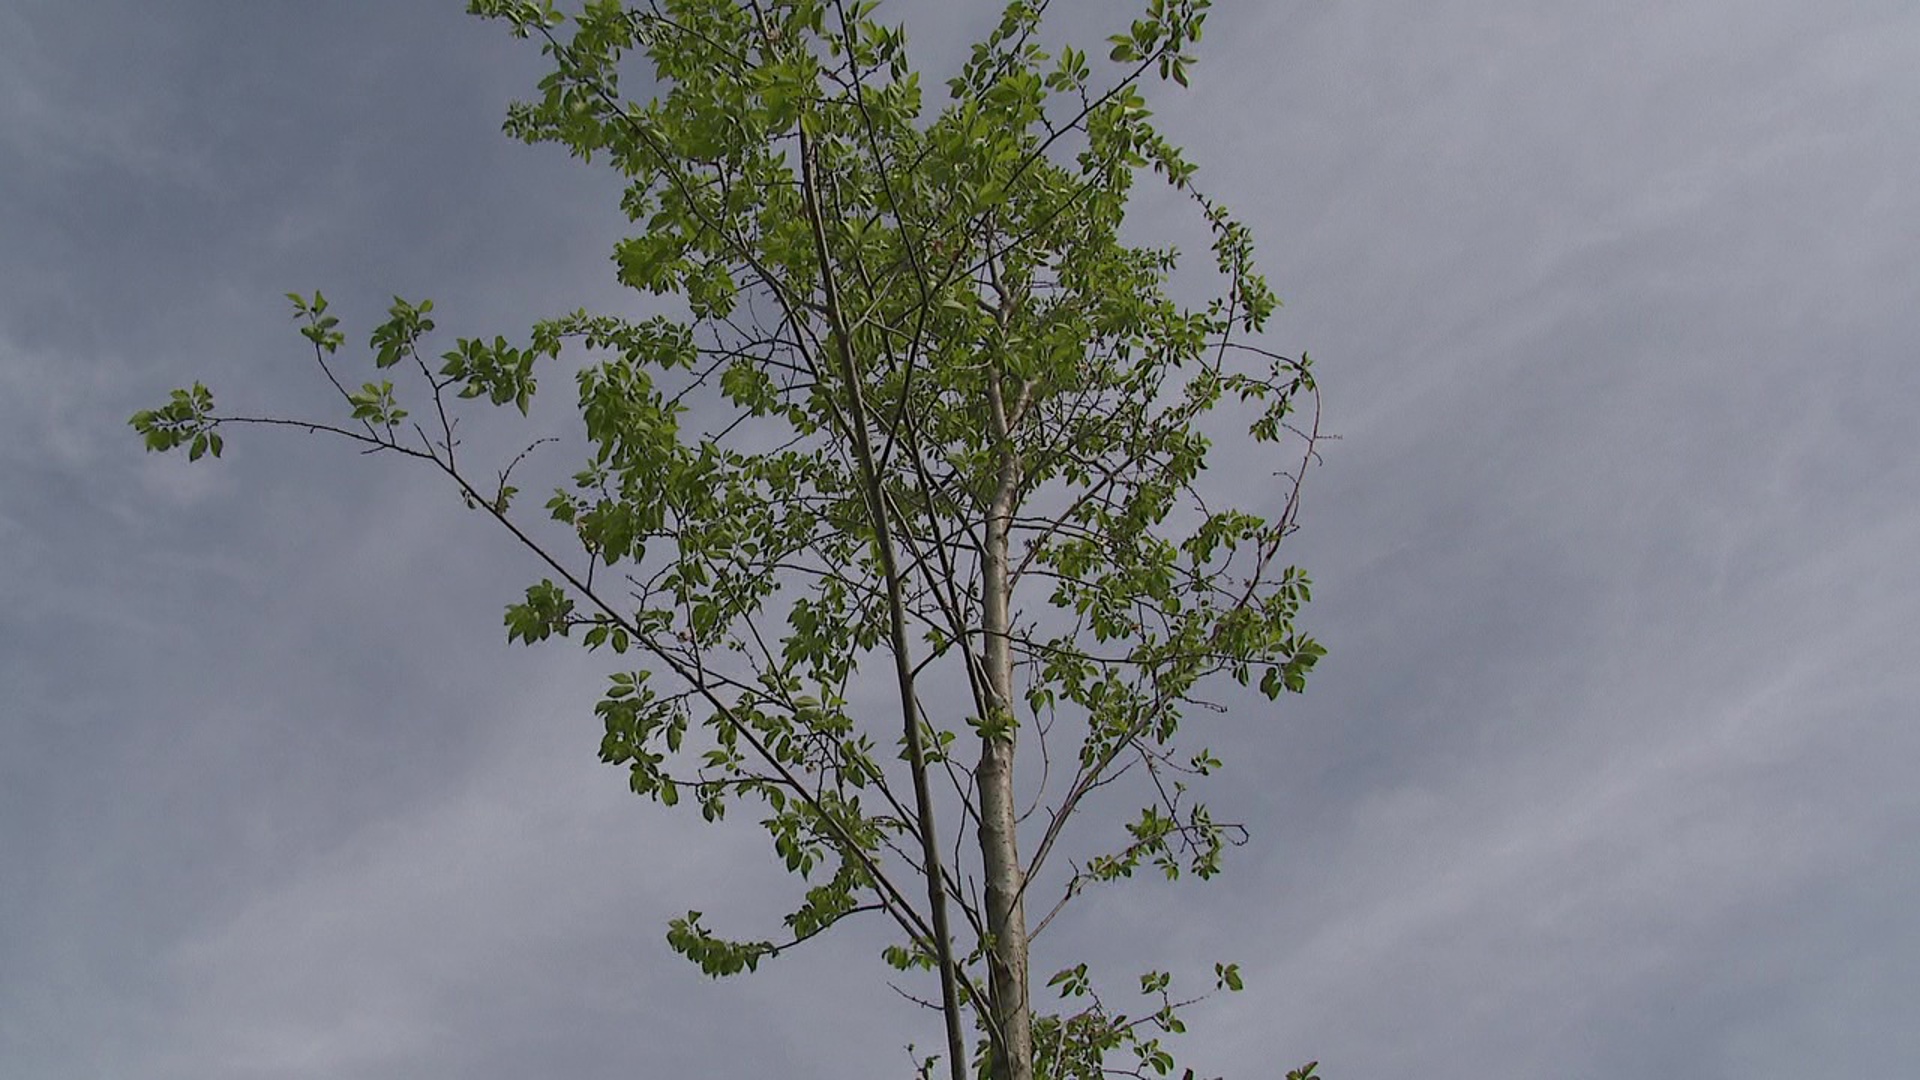 A 20-foot homestead elm tree was planted on Marywood's campus as a reminder and encouragement to kindness.